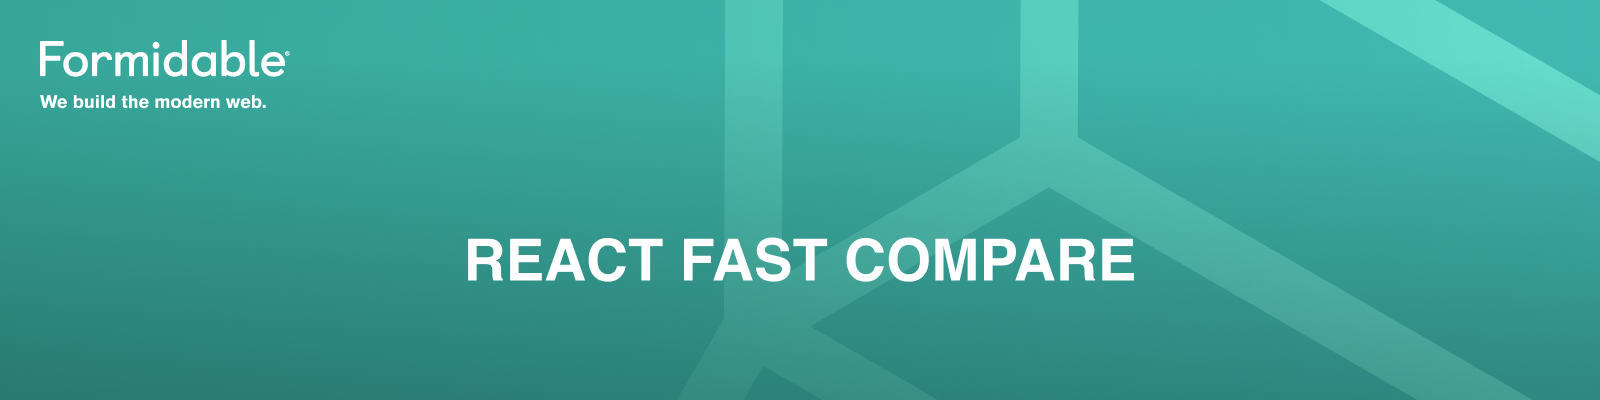 React Fast Compare — Formidable, We build the modern web